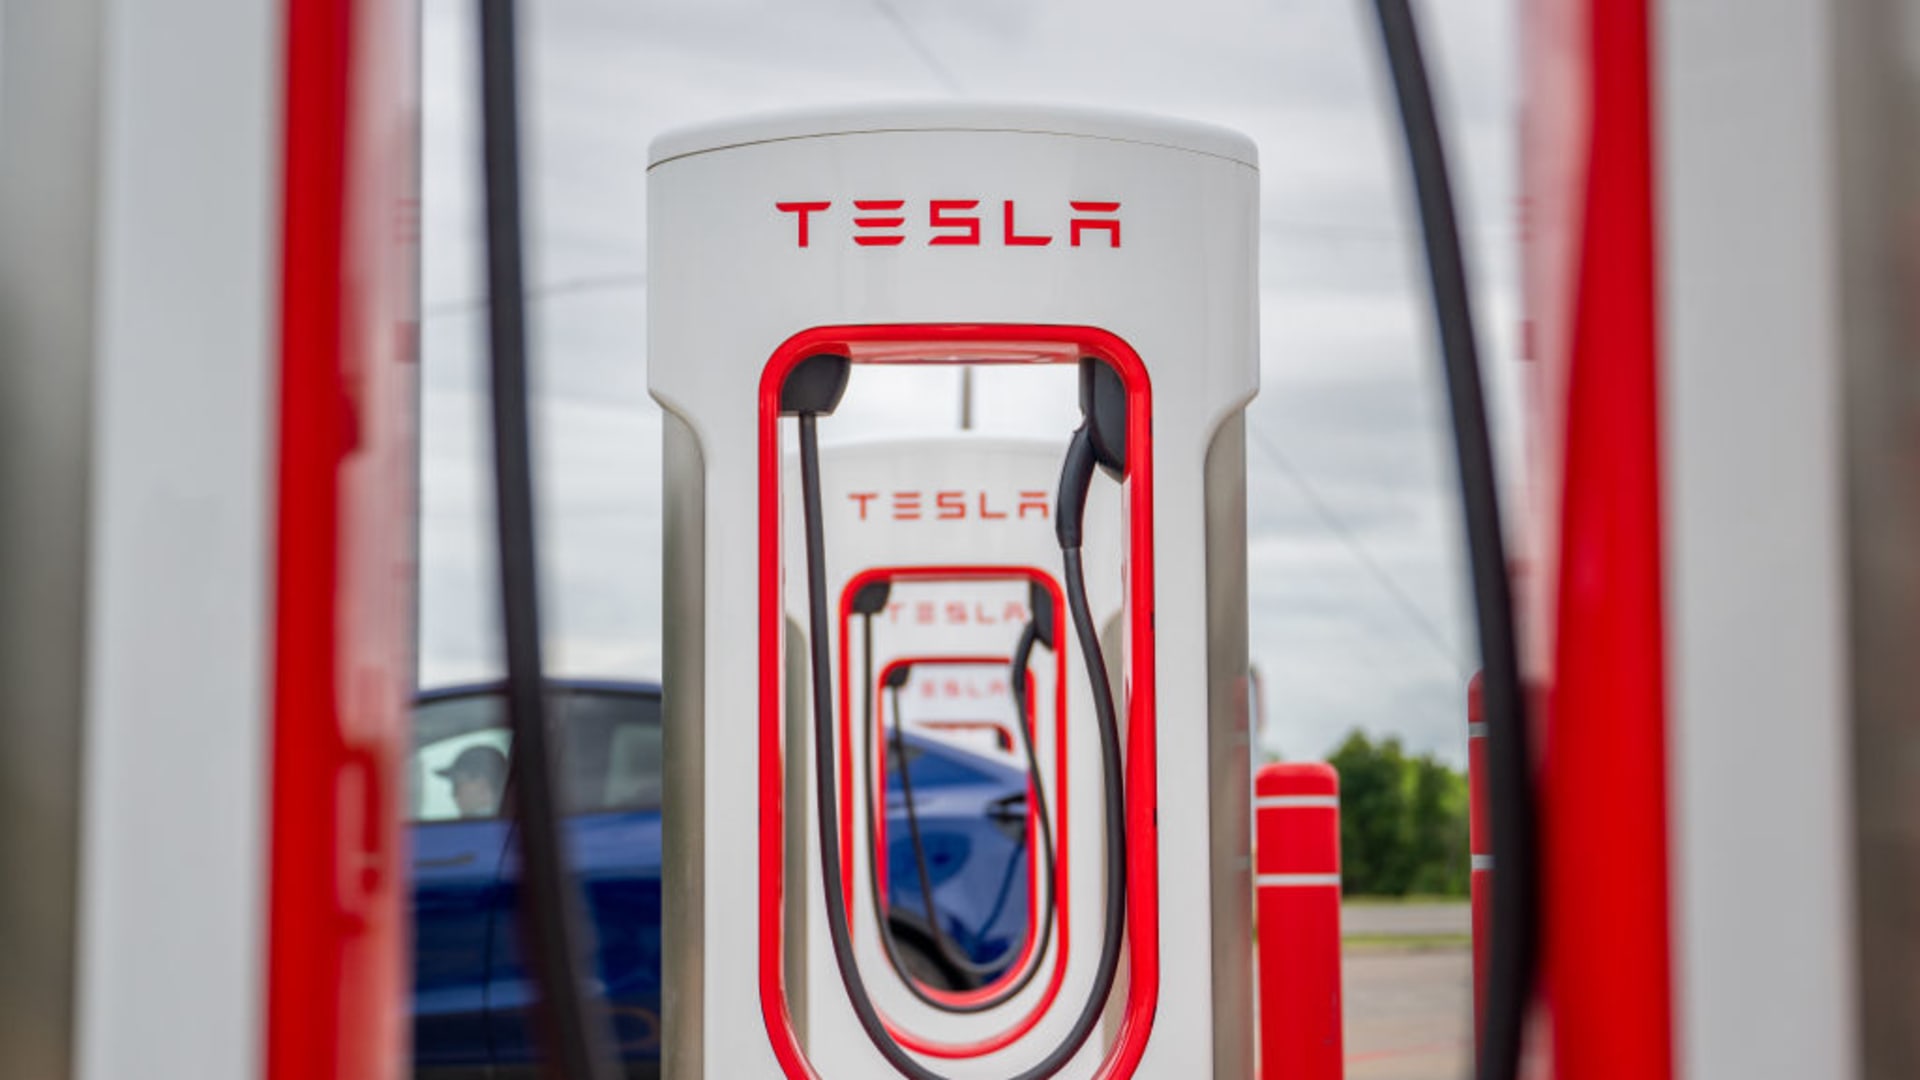 Why the future is uncertain for Tesla's Supercharged network